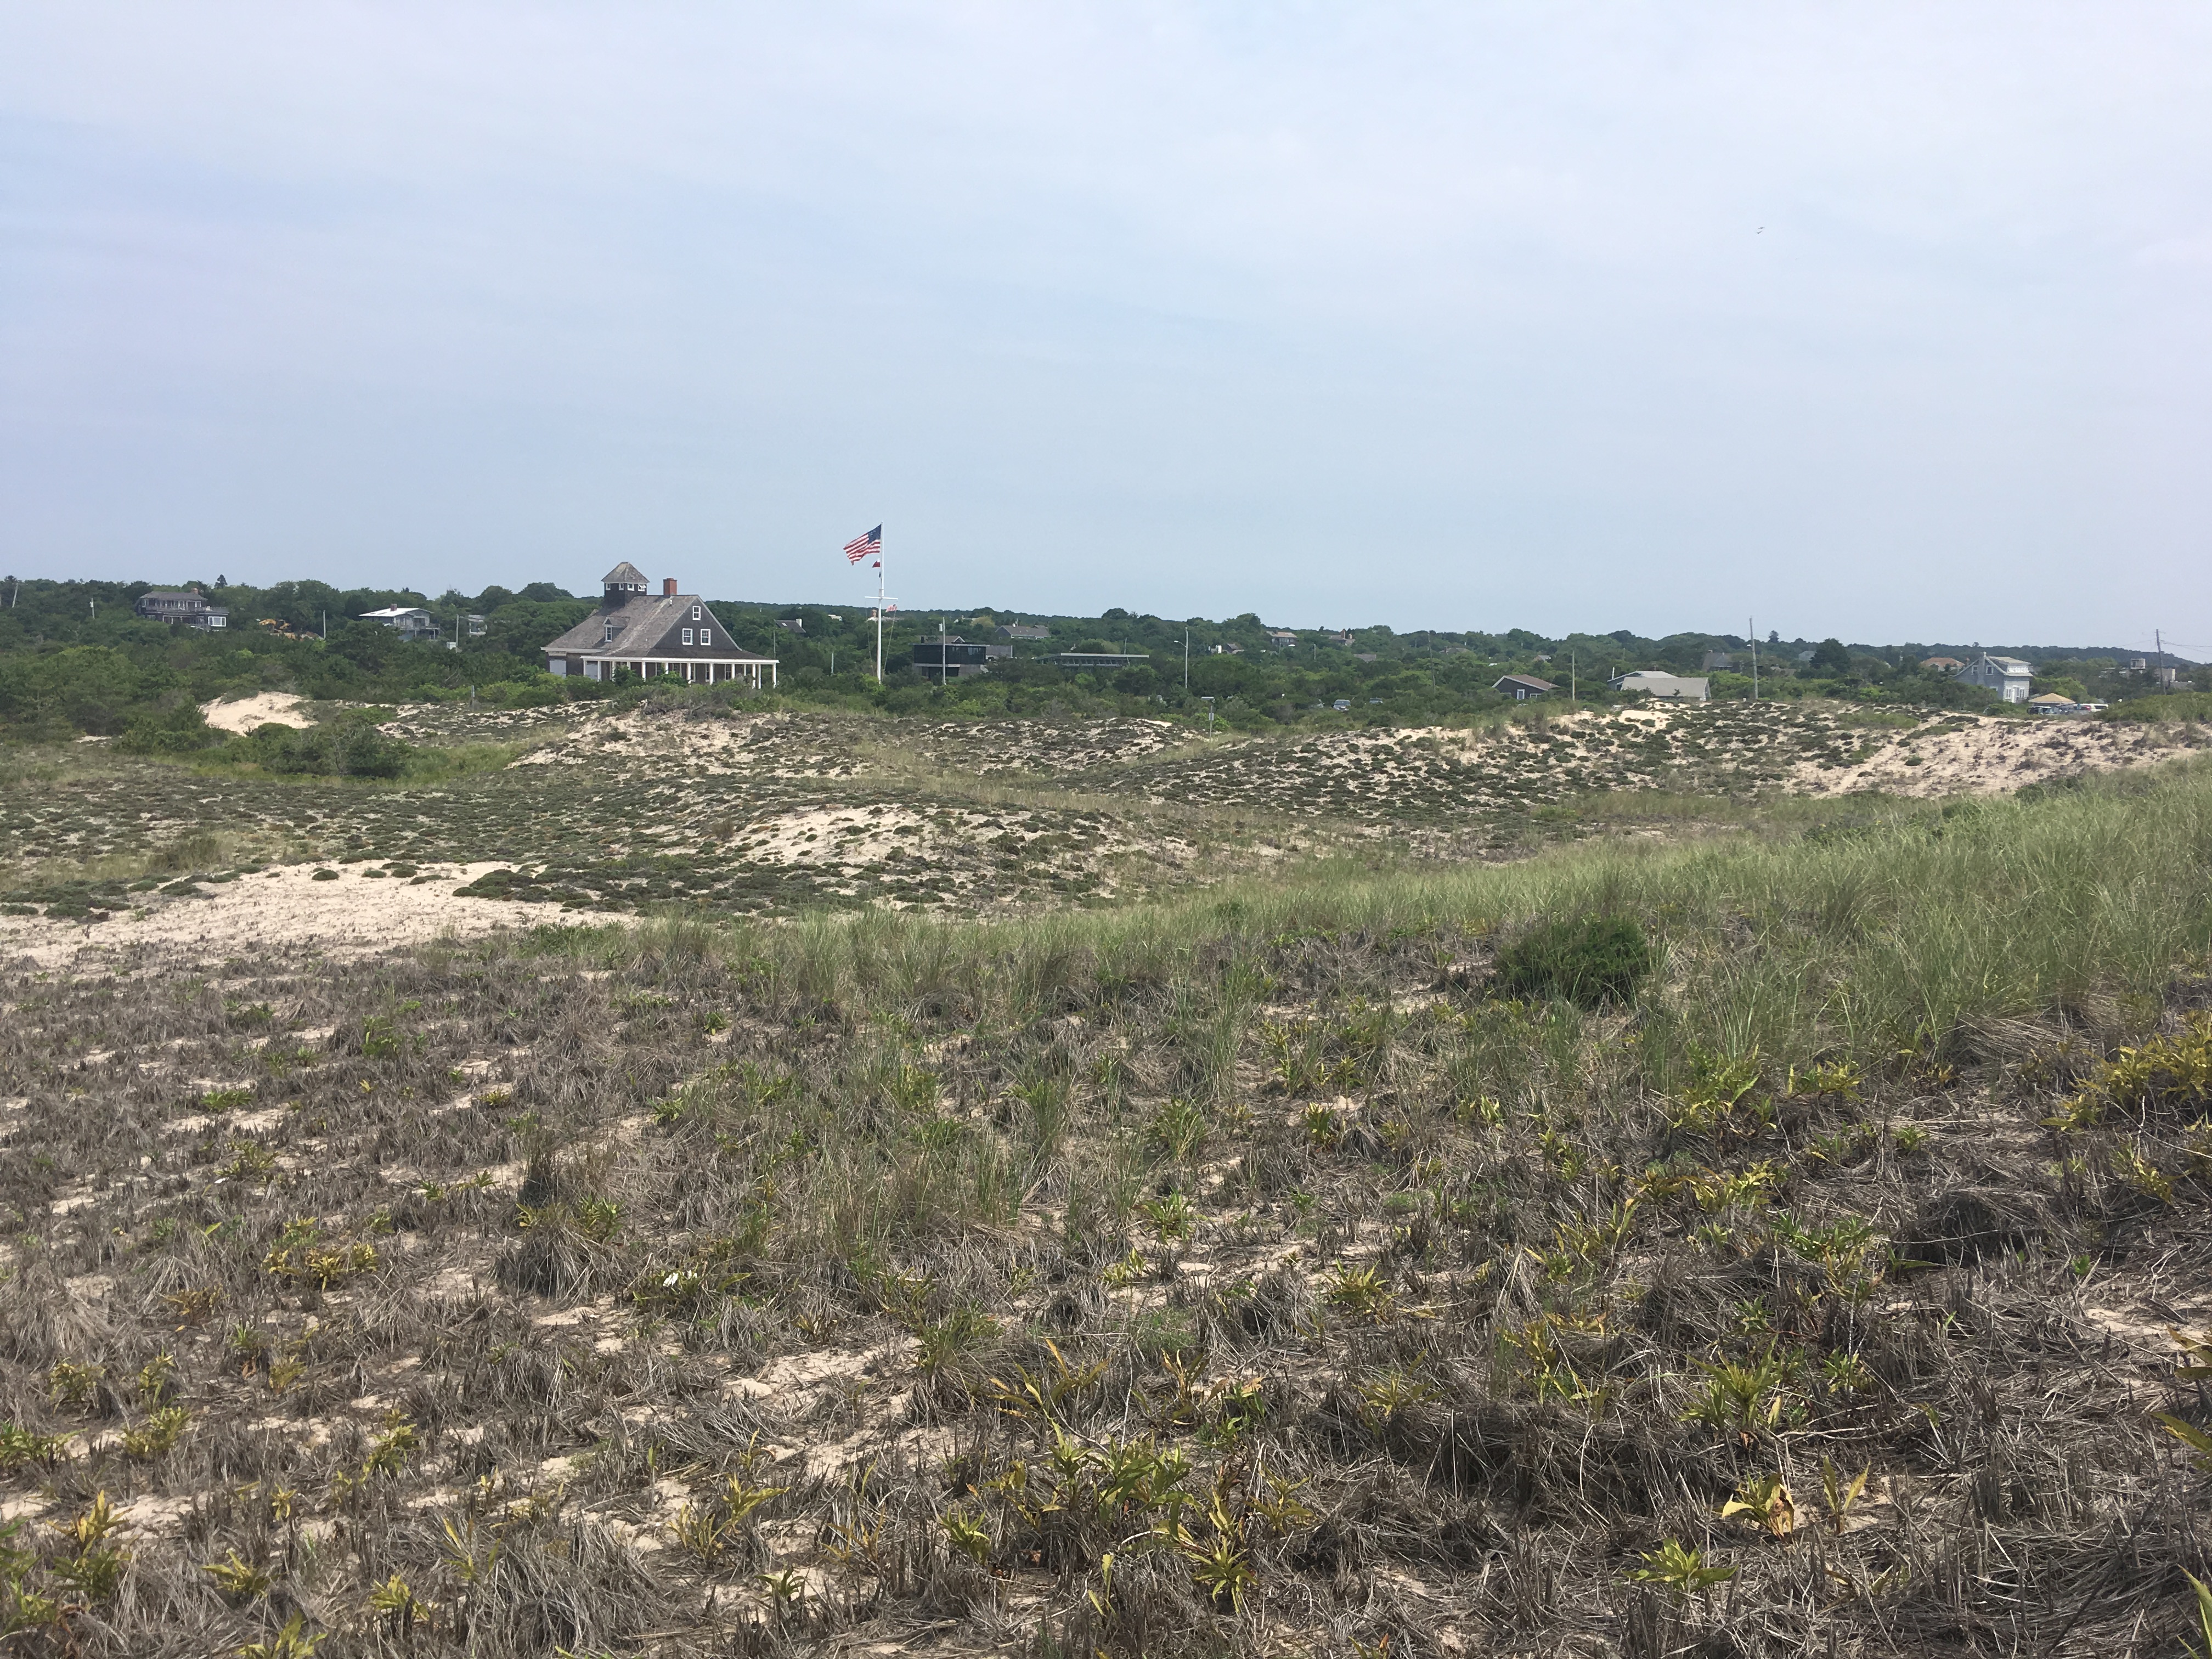 Beach grass covers the dunes in front of a Coast Guard Station